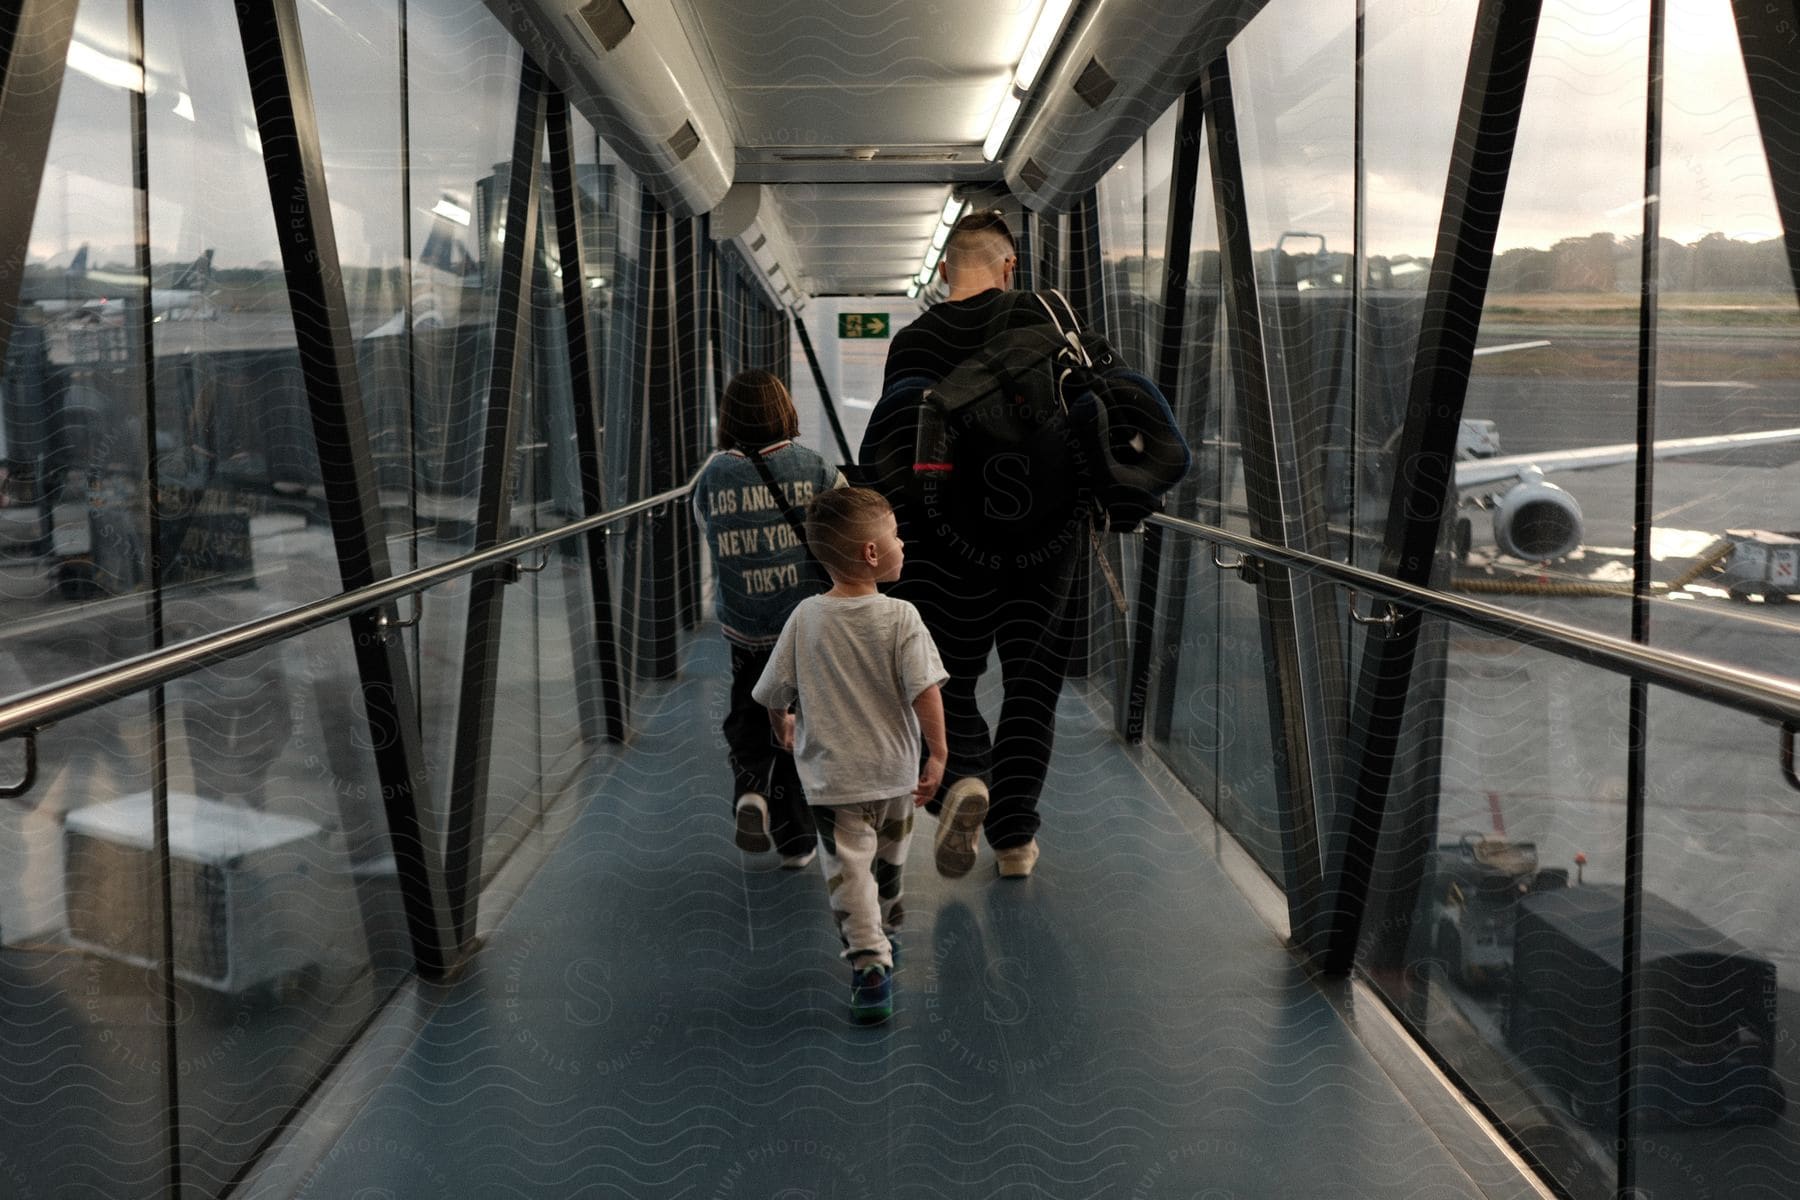 A father walks along an enclosed bridge at an airport towards a stationary airplane.